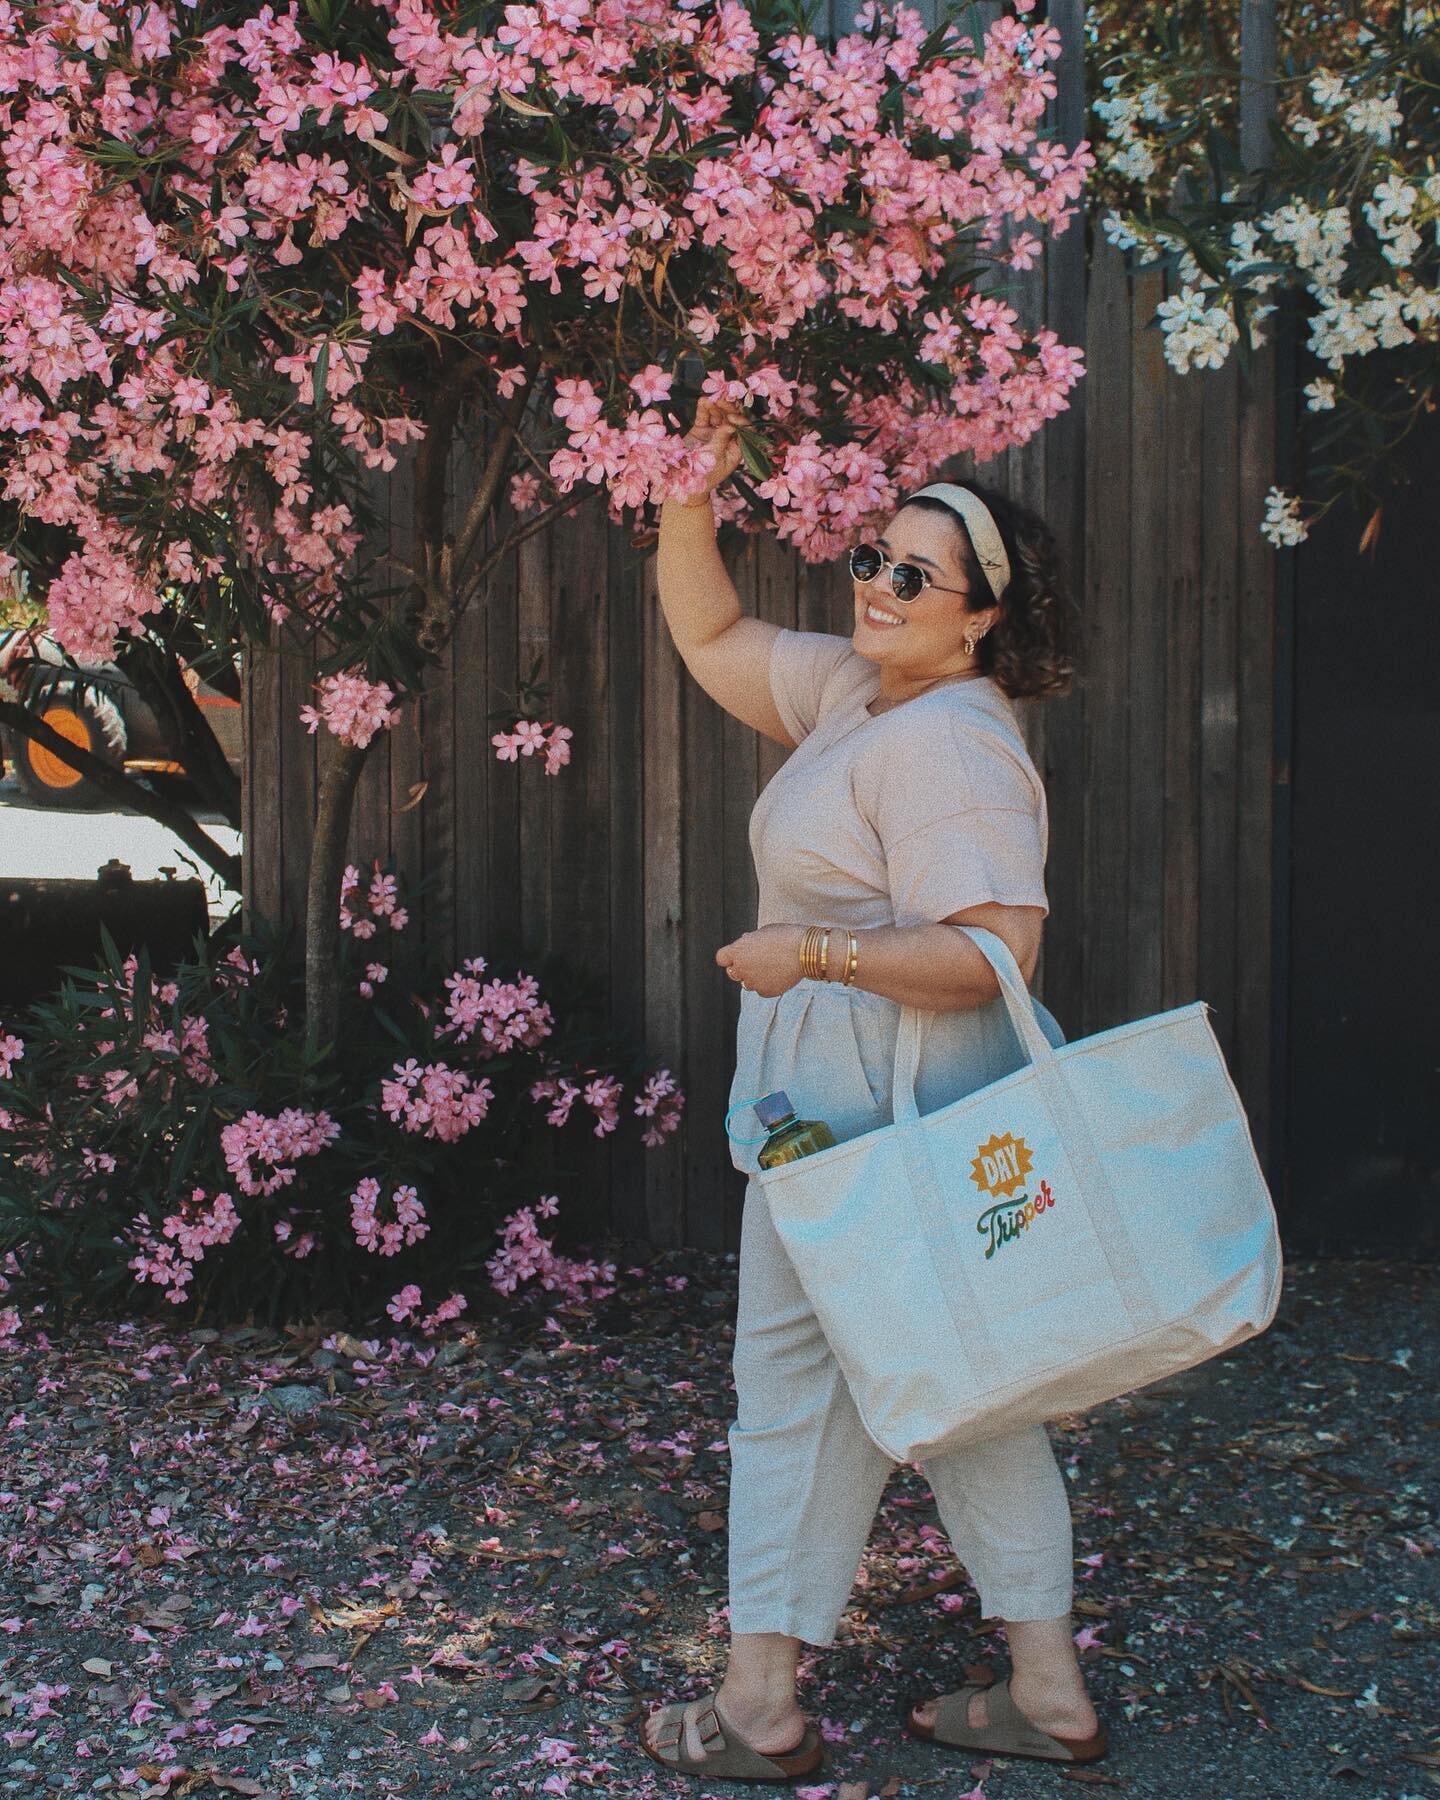 I&rsquo;ve got my bottle + tote in hand, some sunnies, and my SPF - let&rsquo;s go!!! ☺️ Join me and make the most of your summer with @zappos and @llbean and enter their awesome giveaway on Zappos&rsquo; IG! See their page for more info and to enter